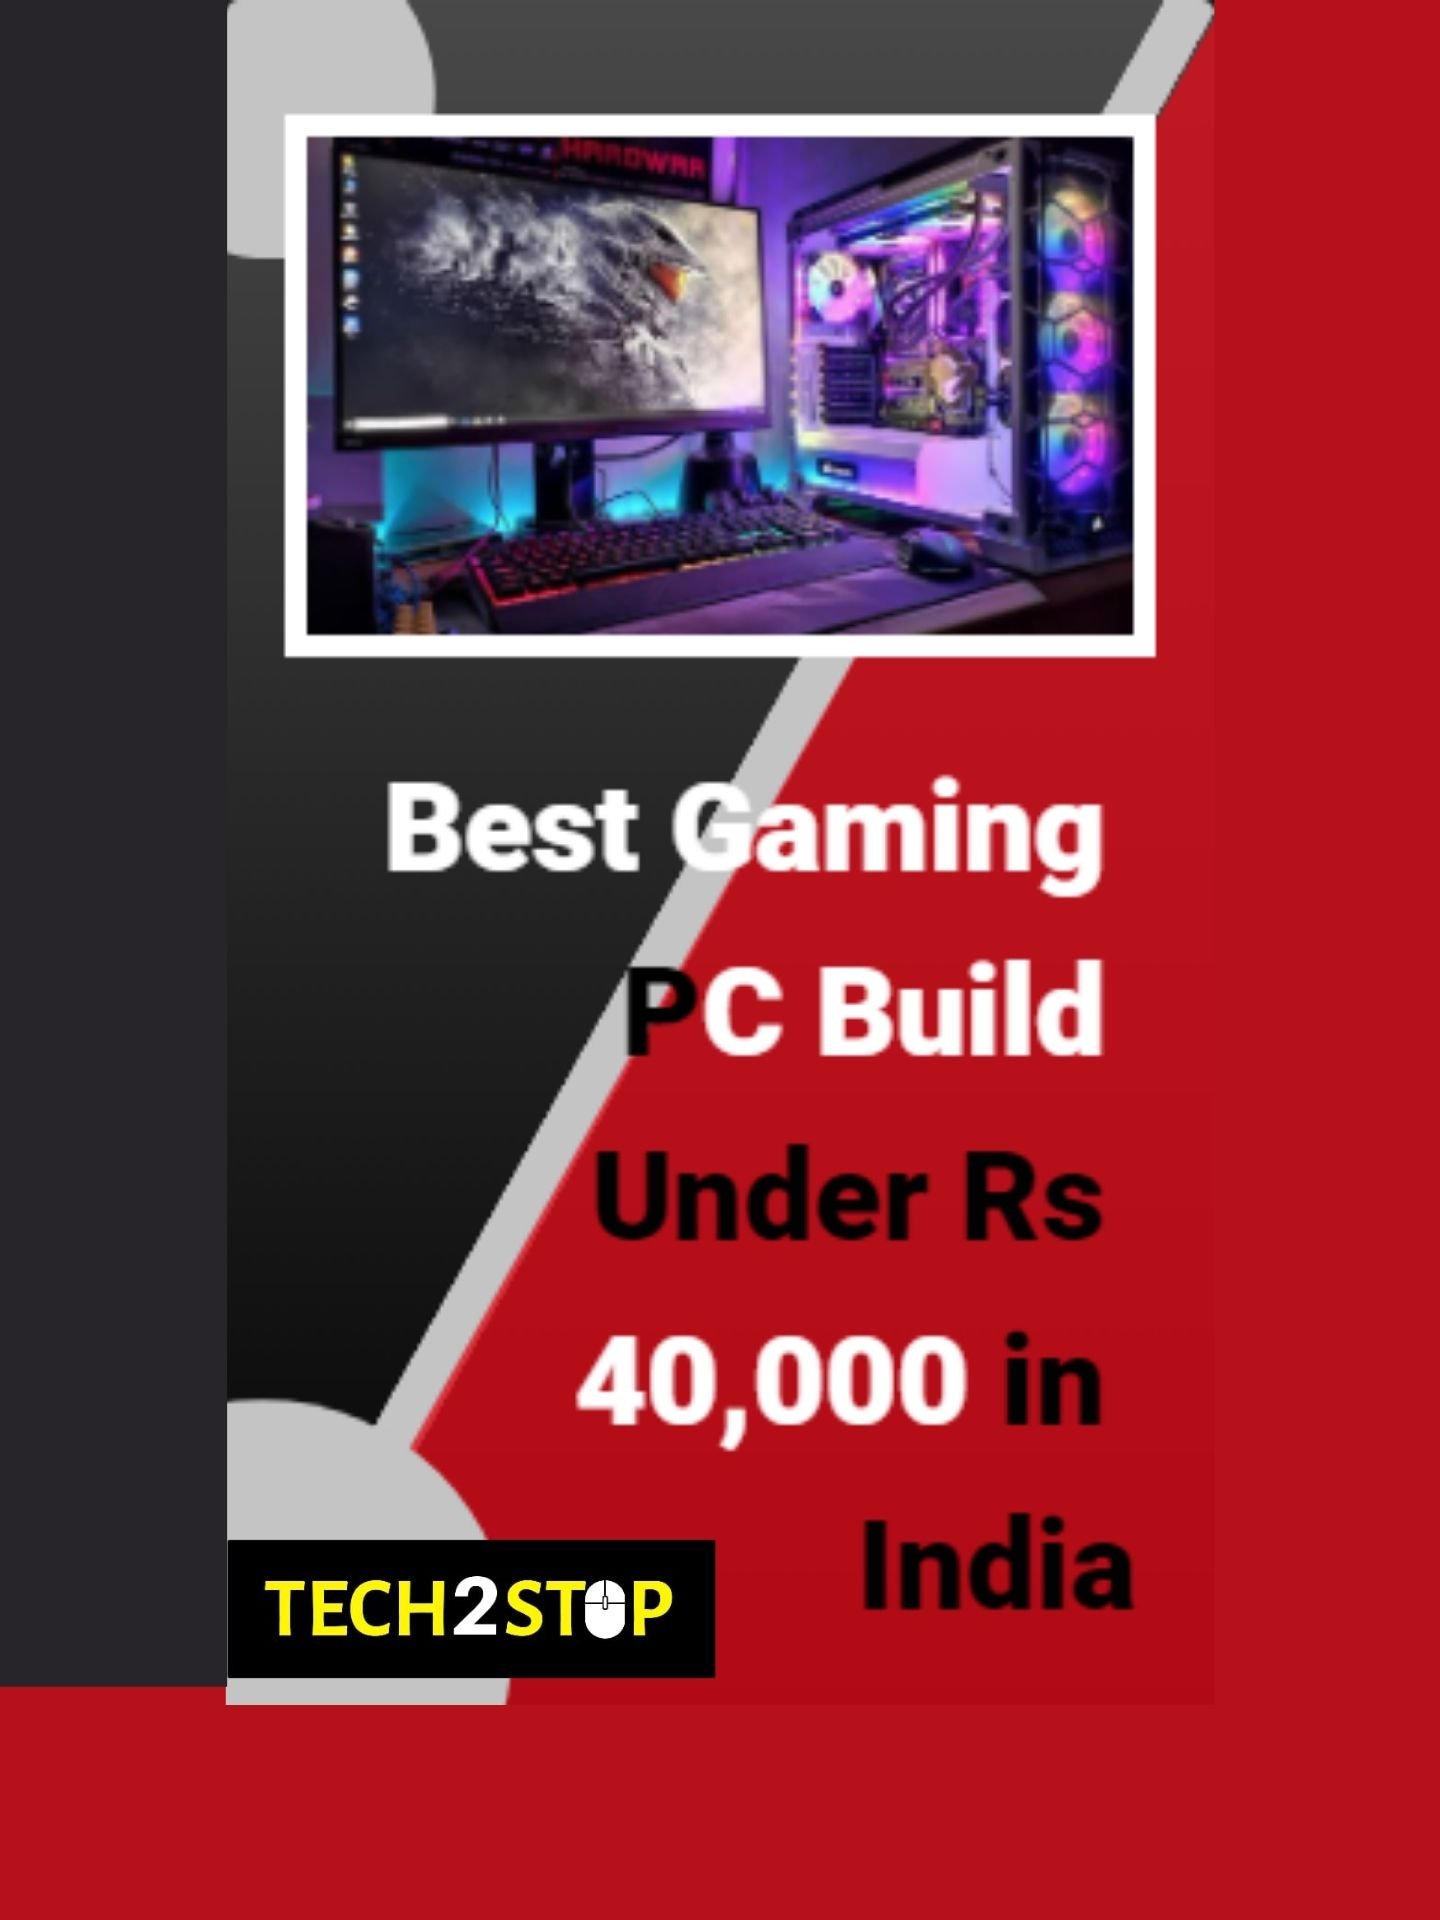 Best Gaming PC Under Rs 40,000 in India